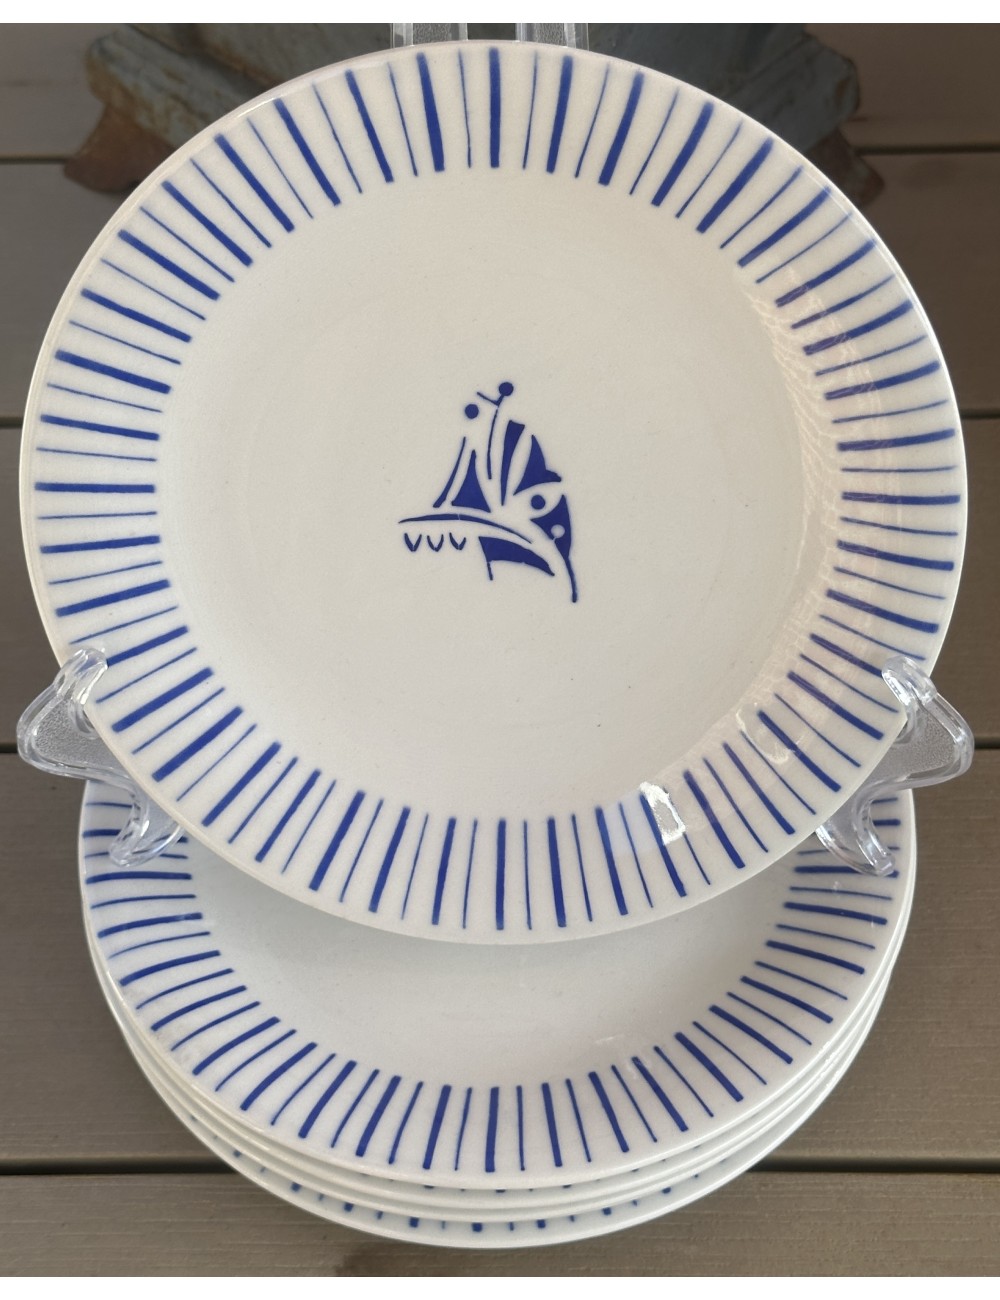 Breakfast plate / Dessert plate - Boch - décor RIVIERA executed in blue - shape MIAMI